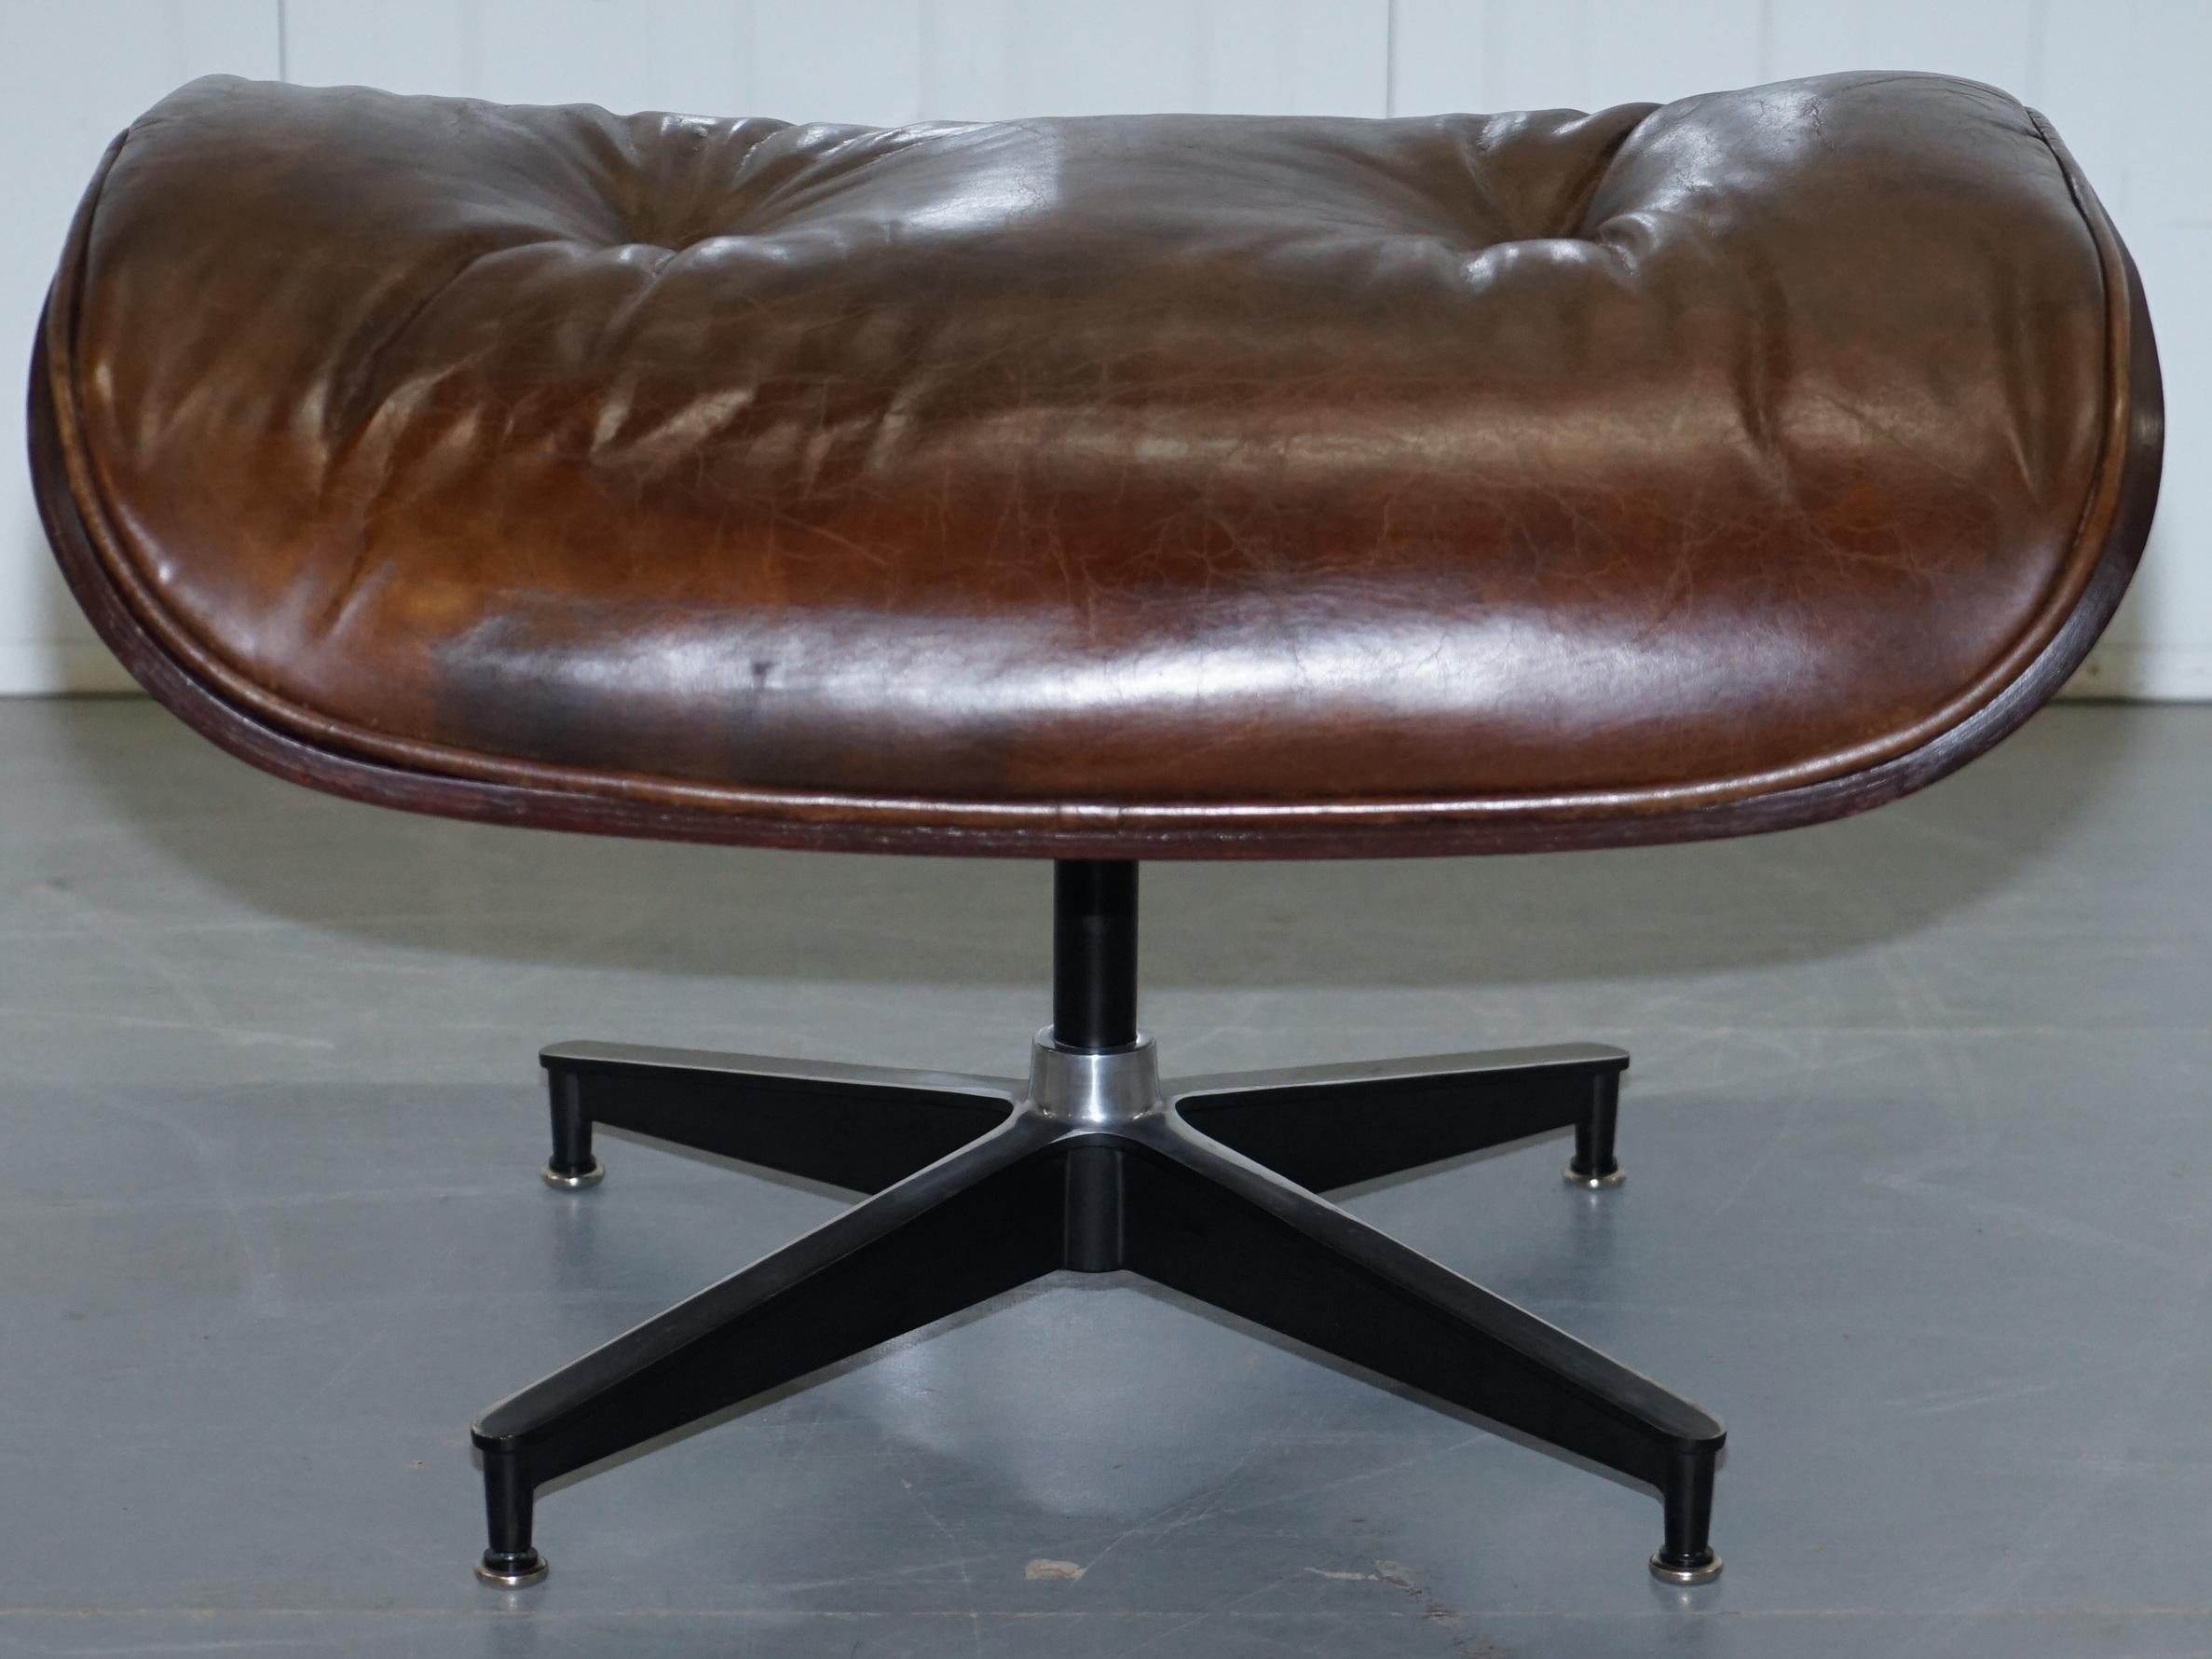 VINTAGE HERITAGE BROWN LEATHER LOUNGE ARMCHAIR & MATCHInG OTTOMAN FOOTSTOOL 9